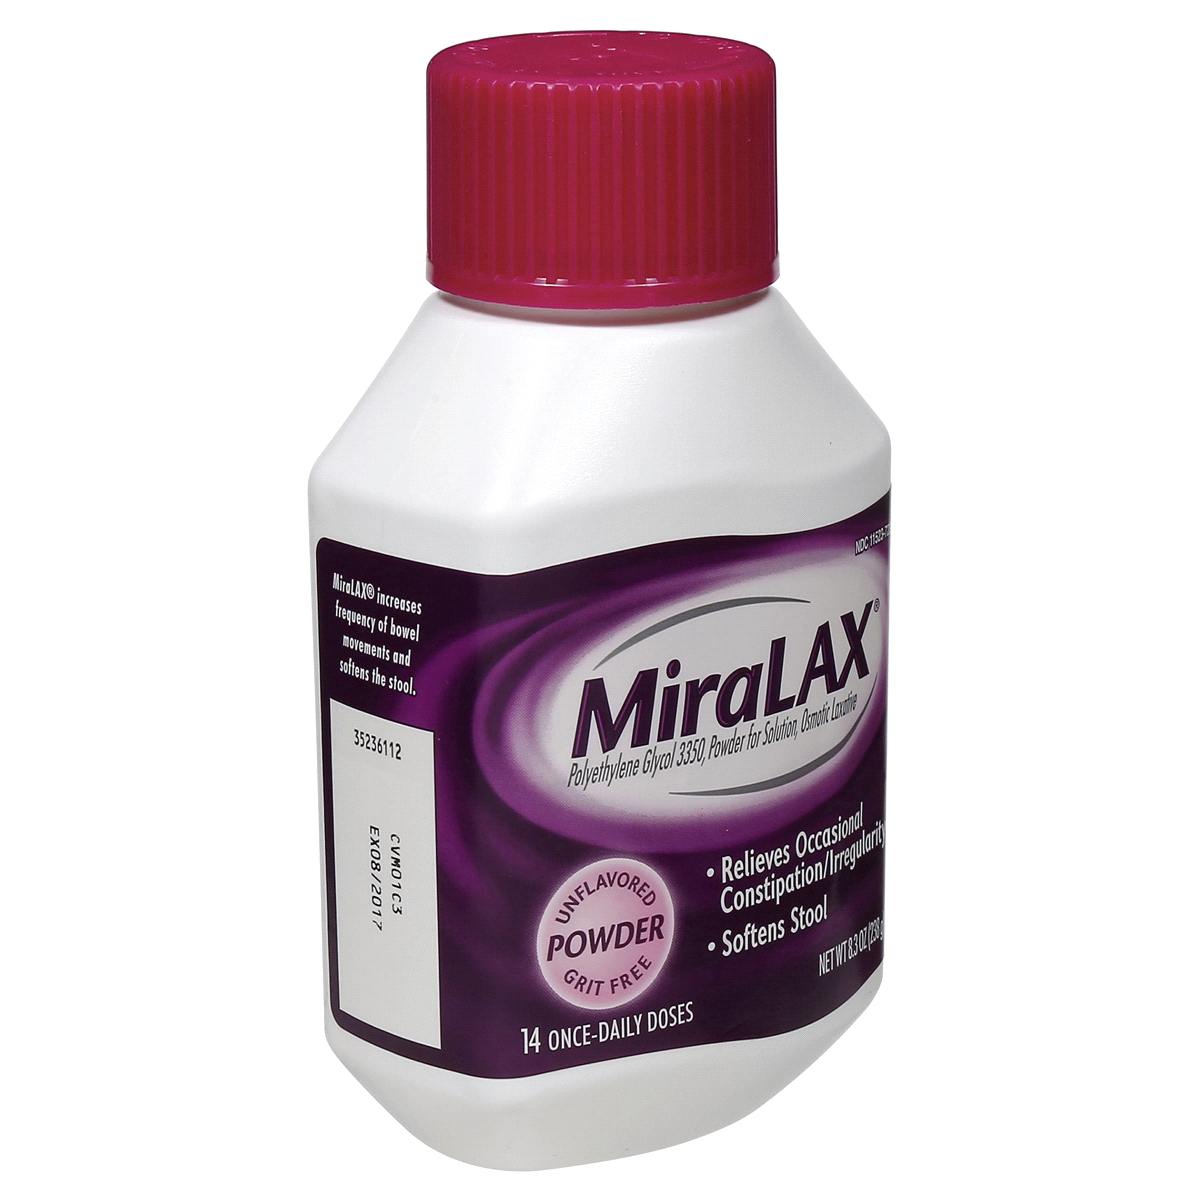 slide 22 of 37, Miralax Powder Osmotic Unflavored Laxative 8.3 oz Bottle, 